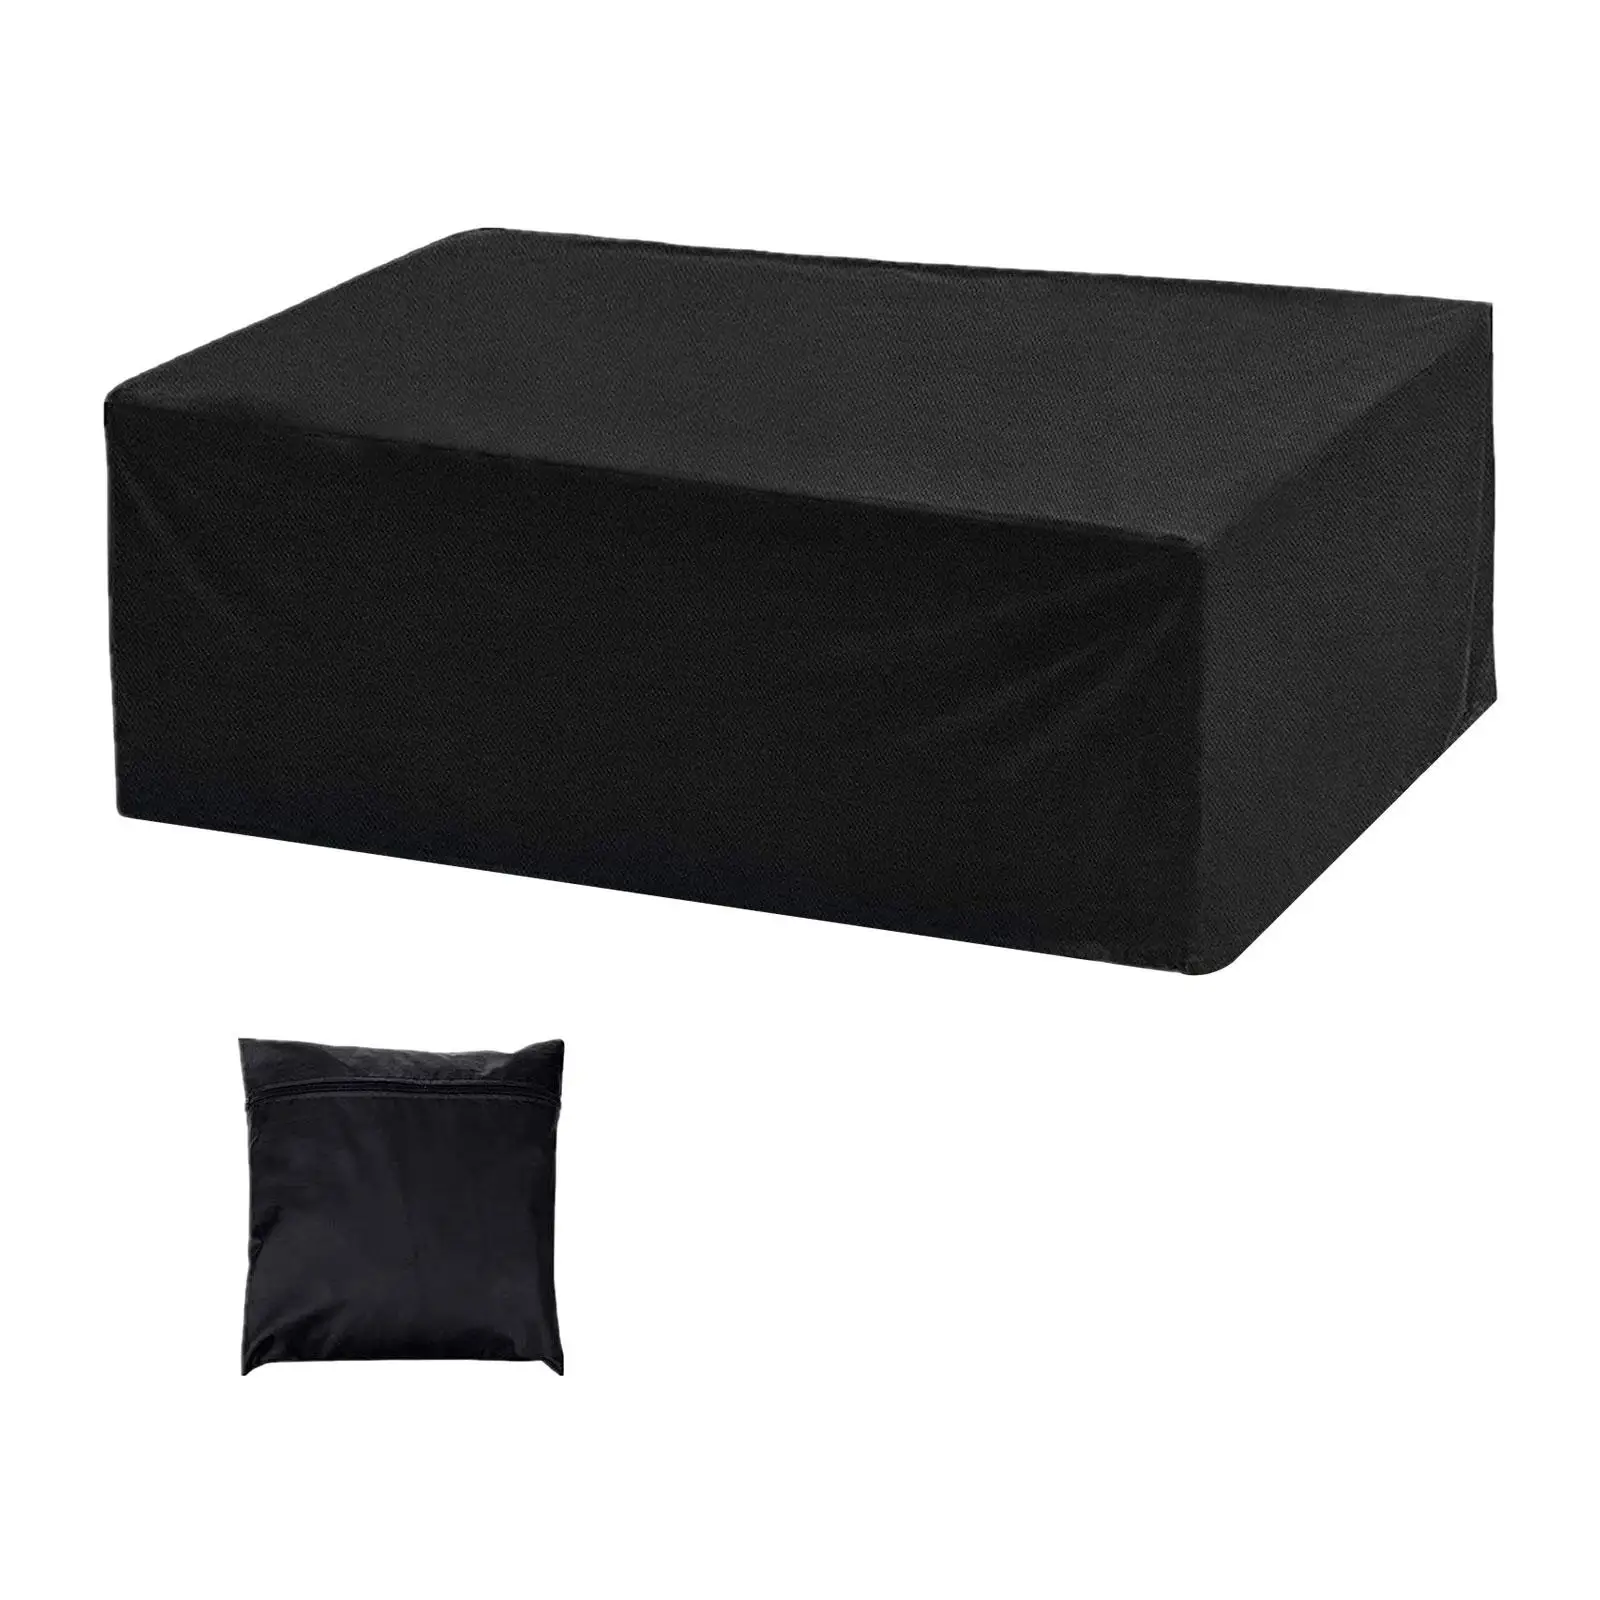 Patio Table Furniture Set Covers Table and Chair Set Covers for Lawn Garden